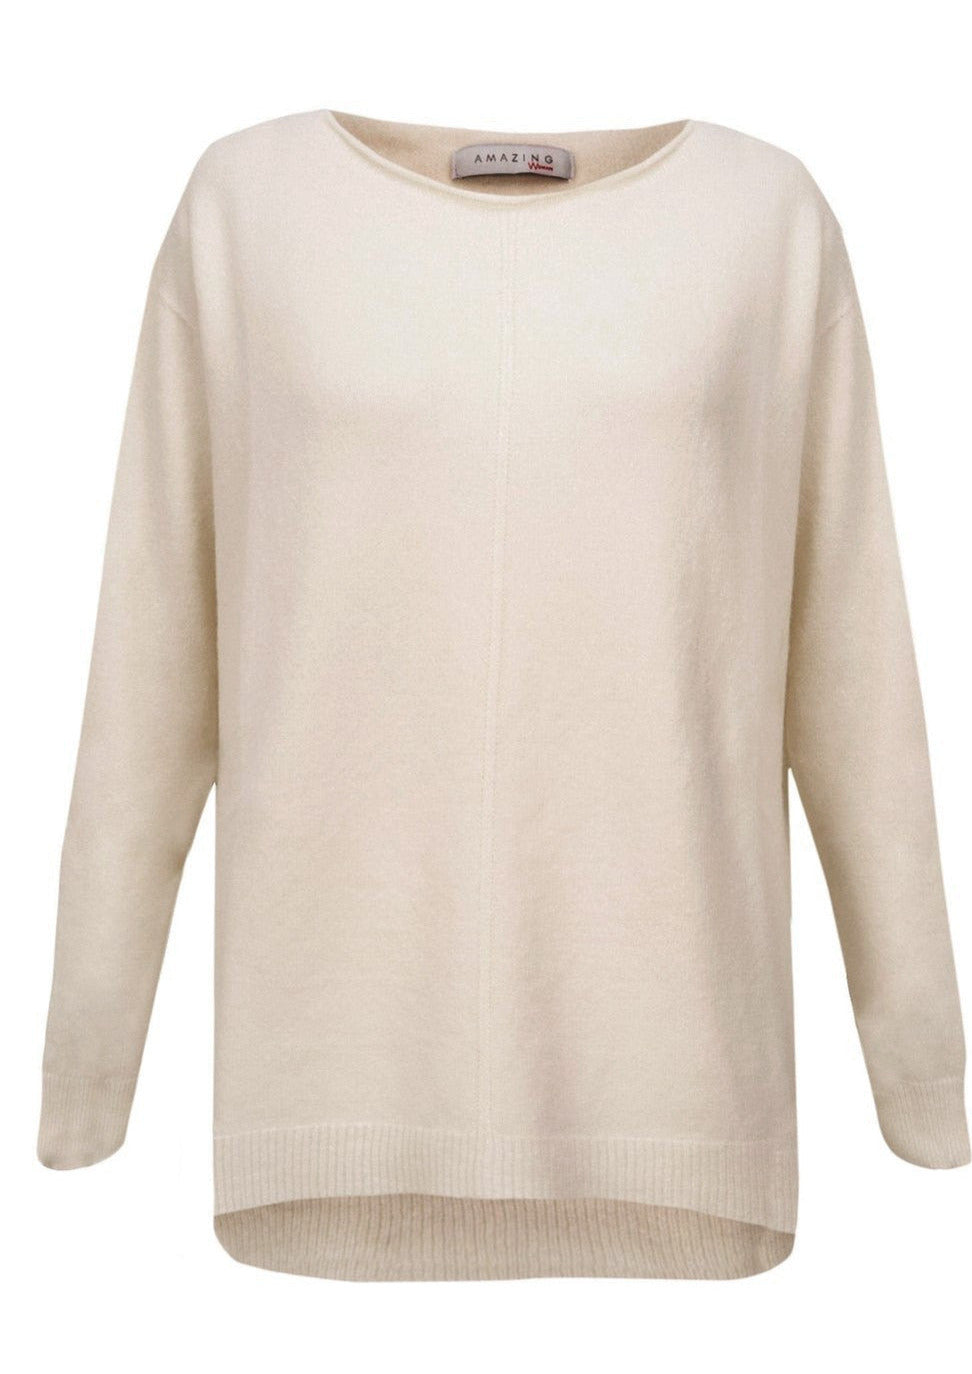 Amazing Woman Maggie Ivory Jumper